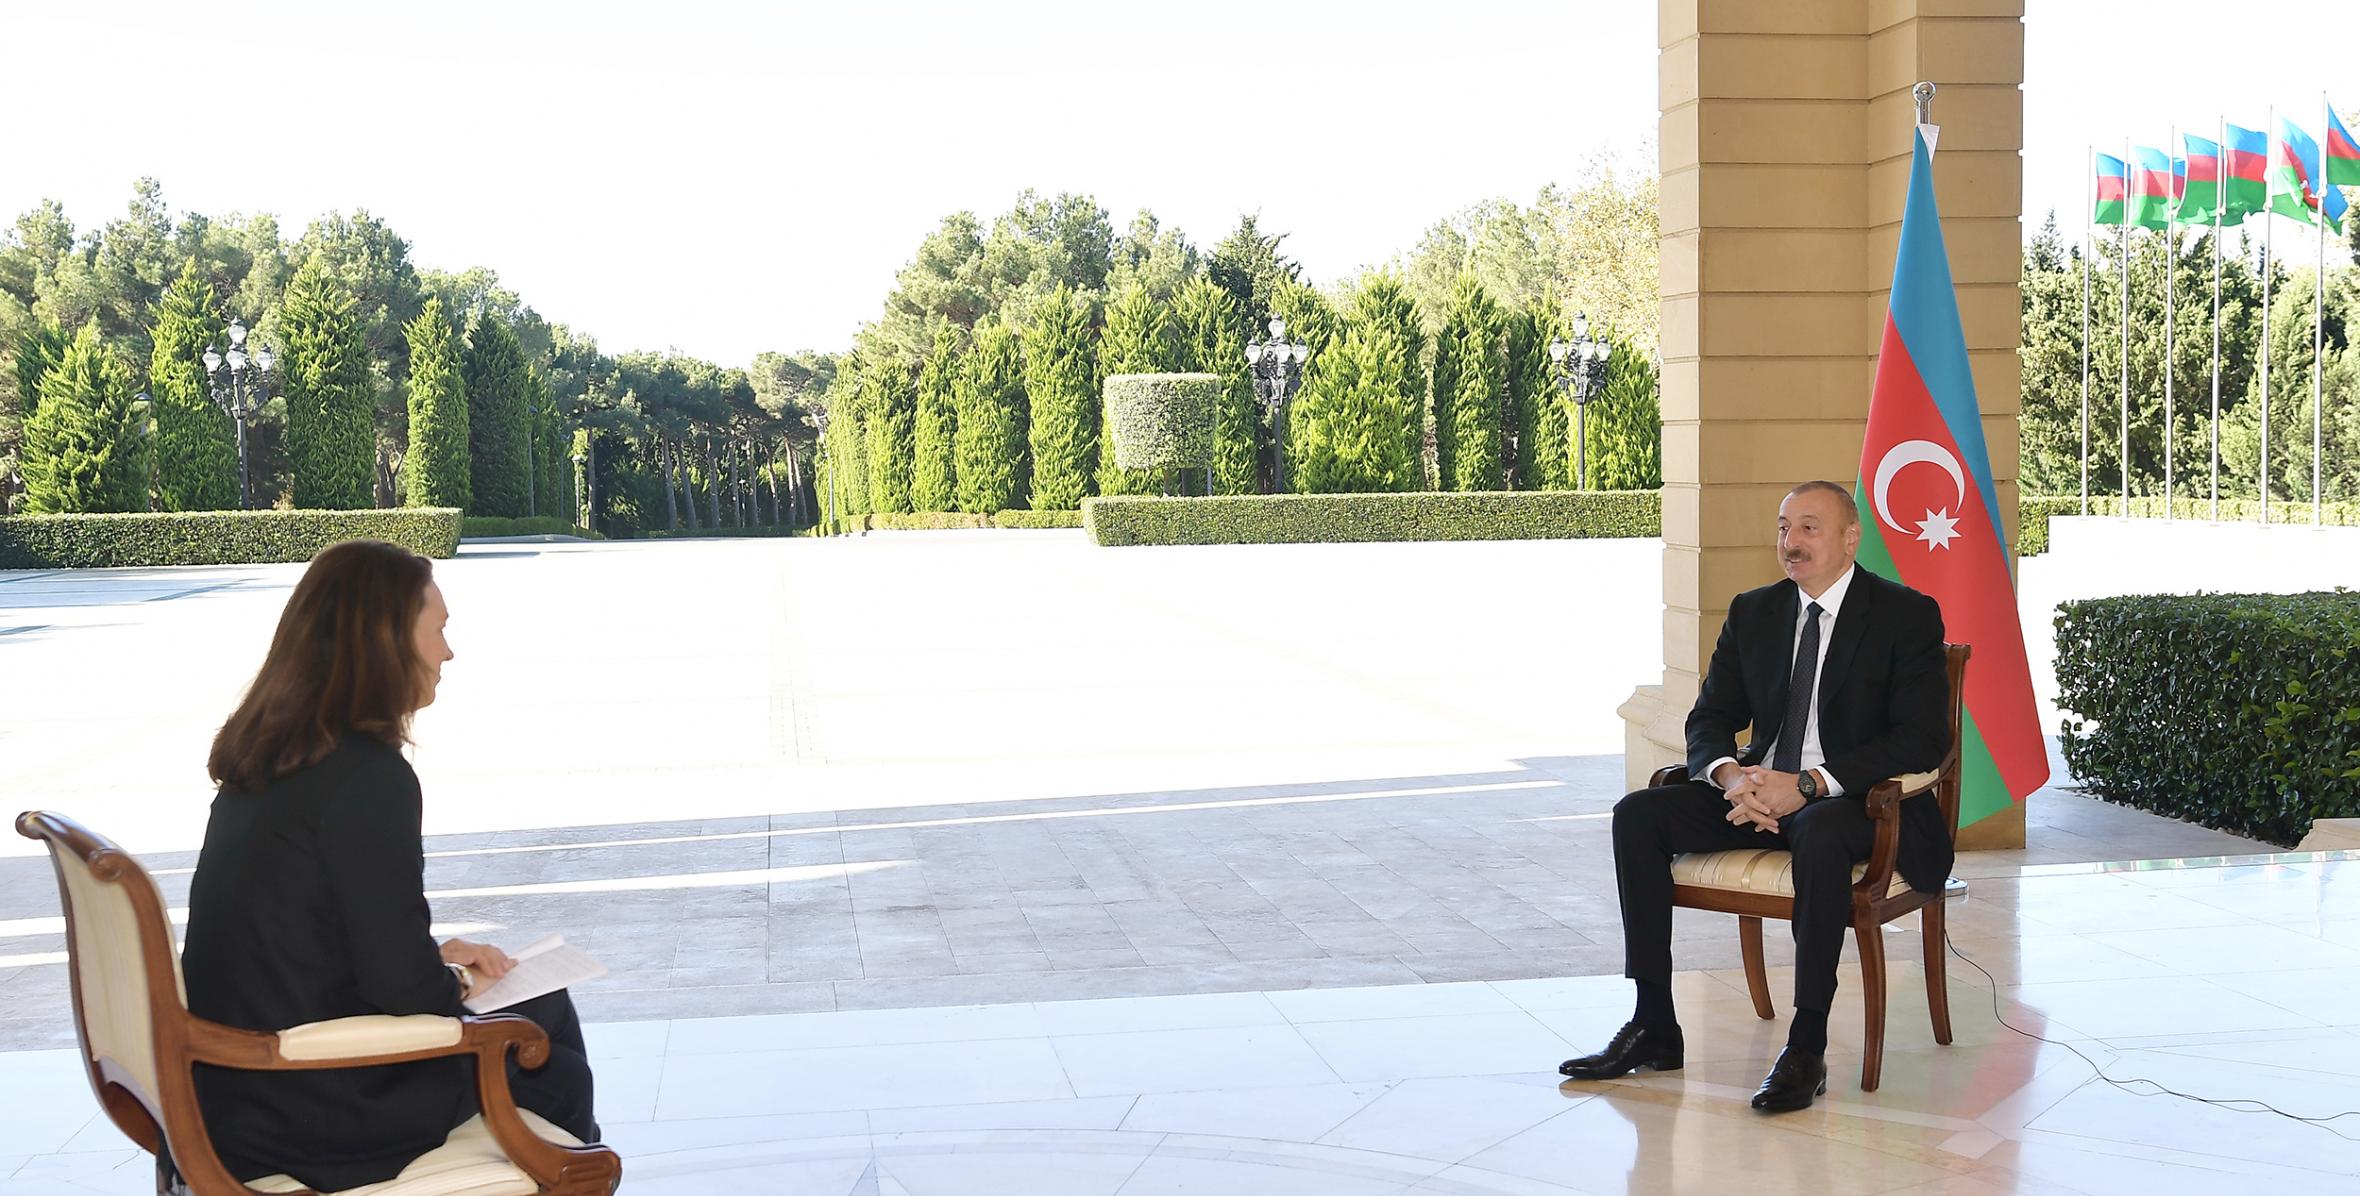 Ilham Aliyev was interviewed by France 24 TV channel